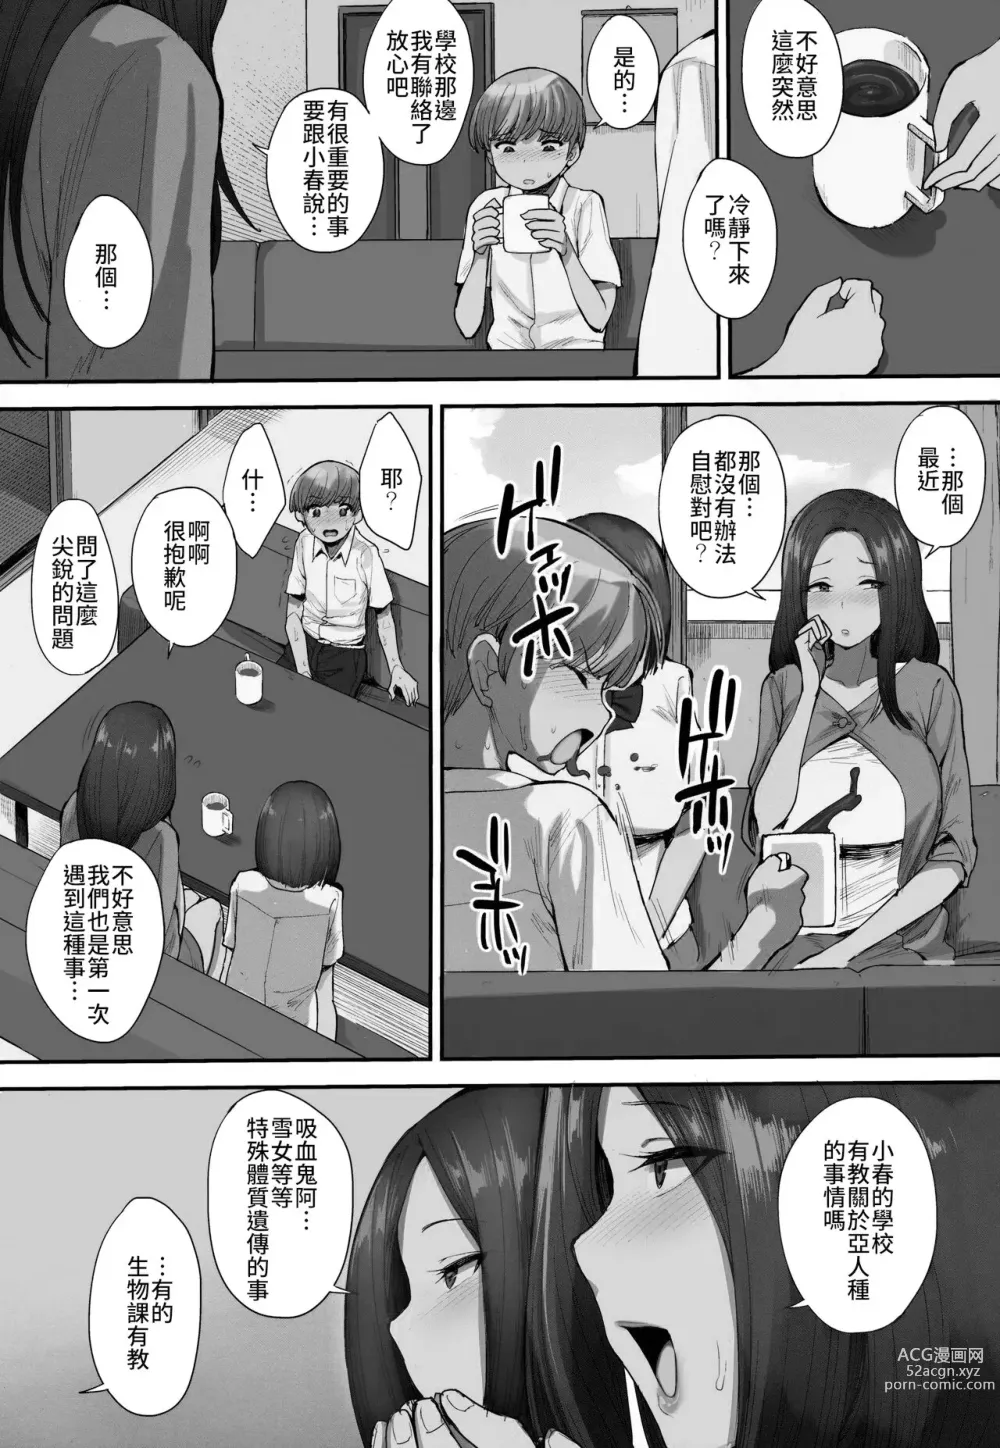 Page 8 of doujinshi 魅魔鄰居 (decensored)